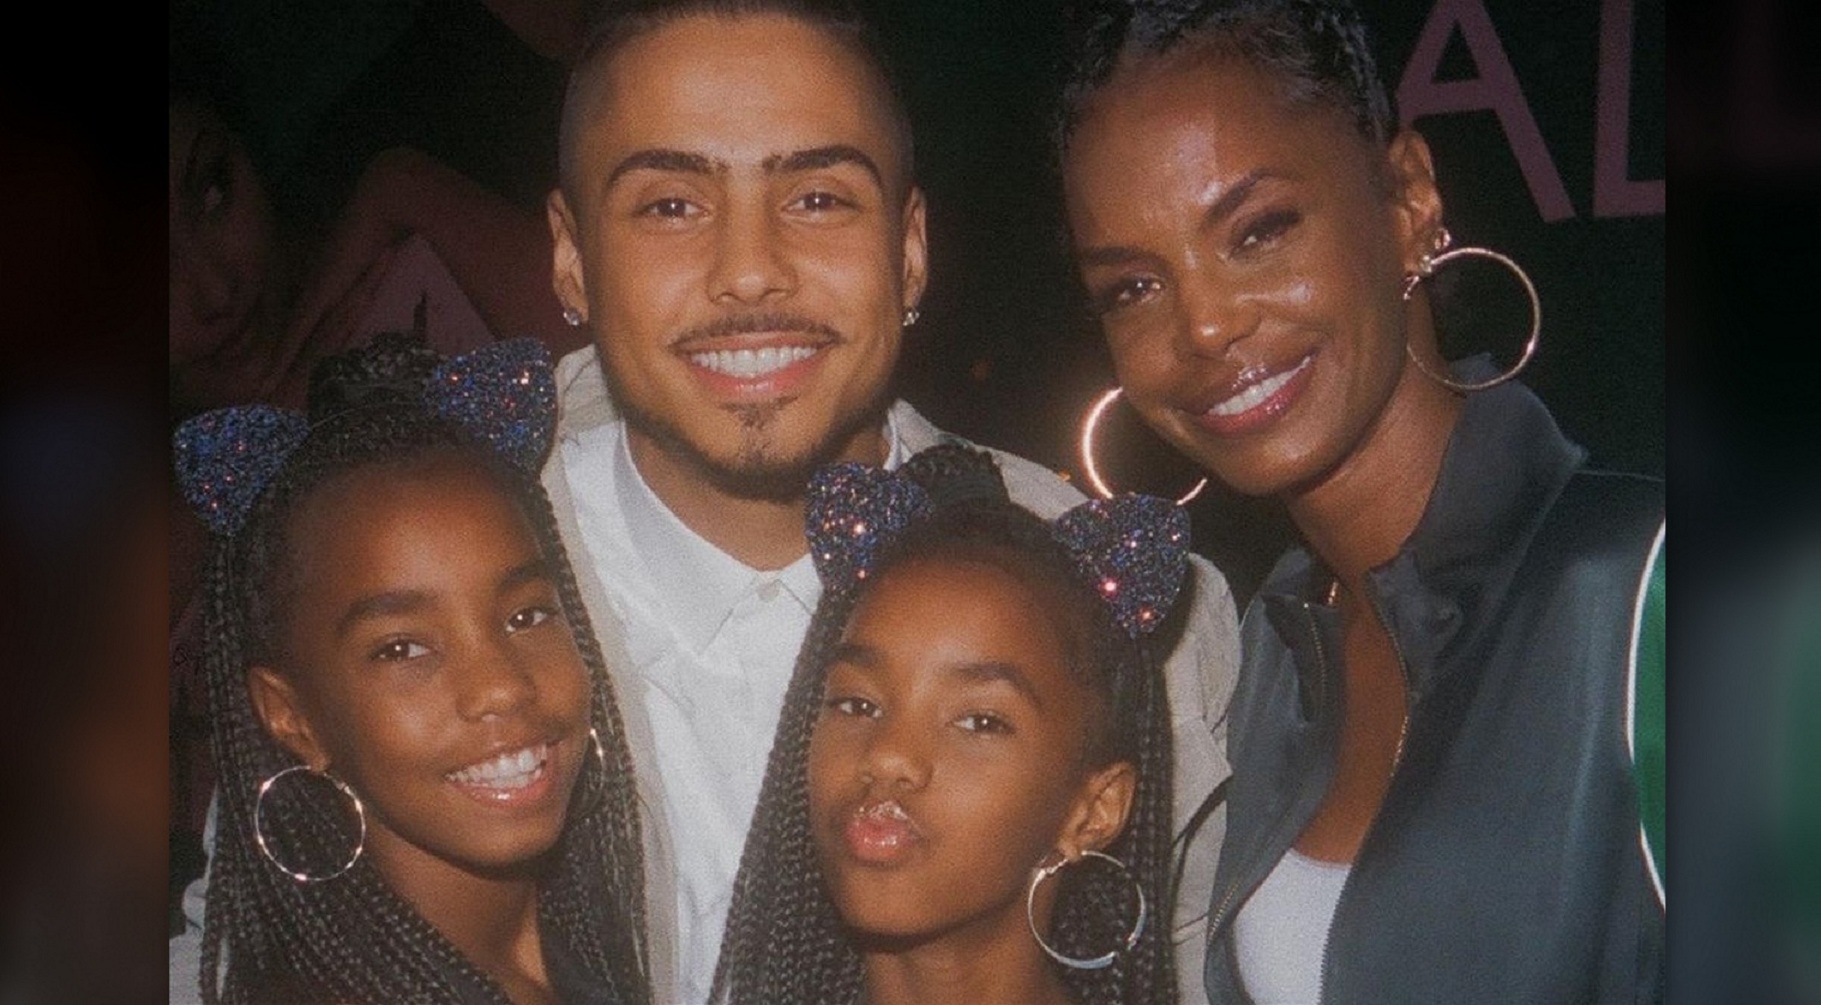 Kim Porter’s Son Quincy Brown Mourns Her Loss, “You Were Way Too Good for This Silly World”